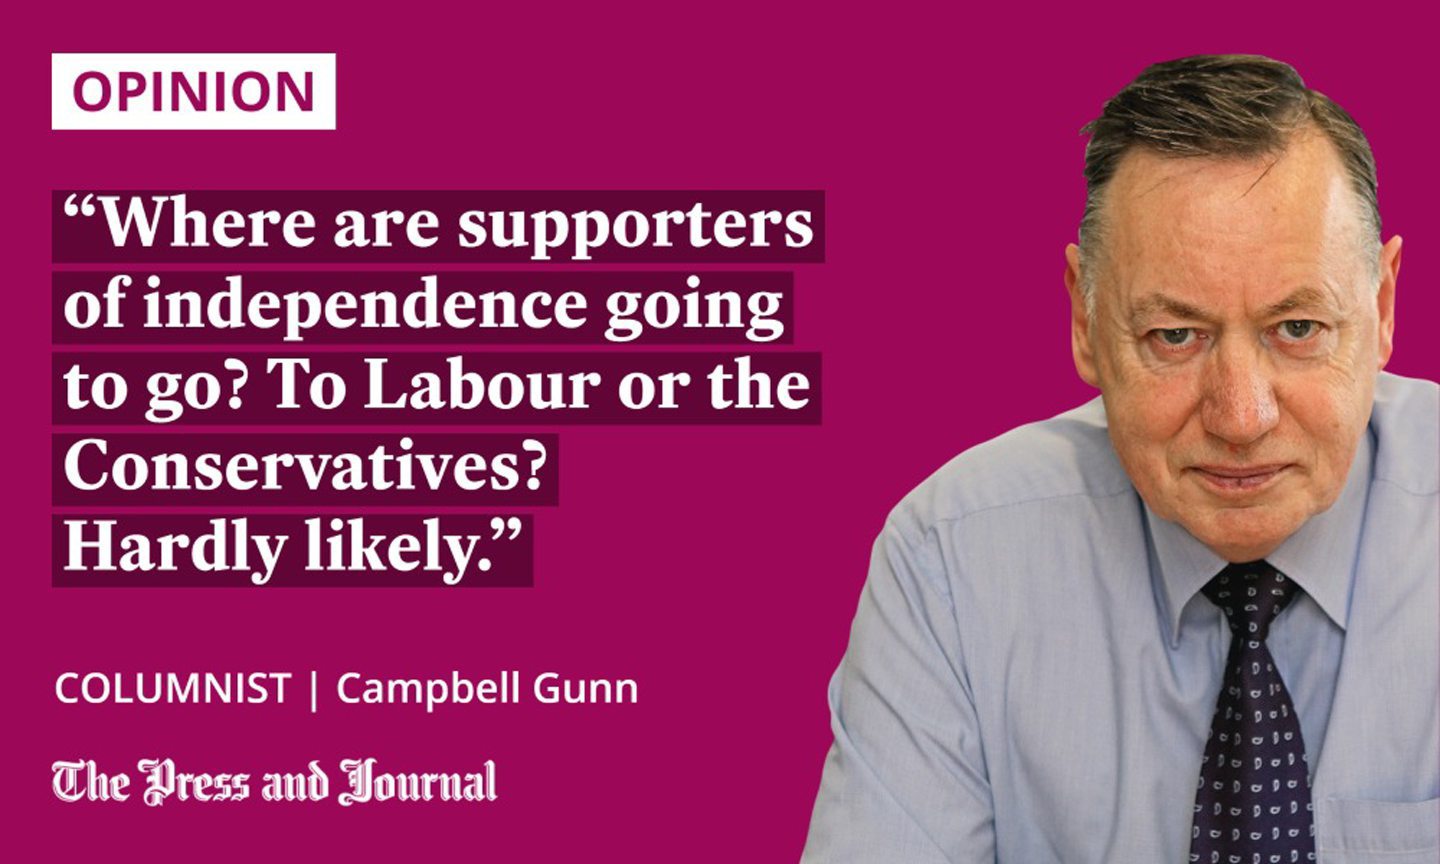 Quotation from columnist Campbell Gunn: "Where are supporters of independence going to go? To Labour or the Conservatives? Hardly likely."